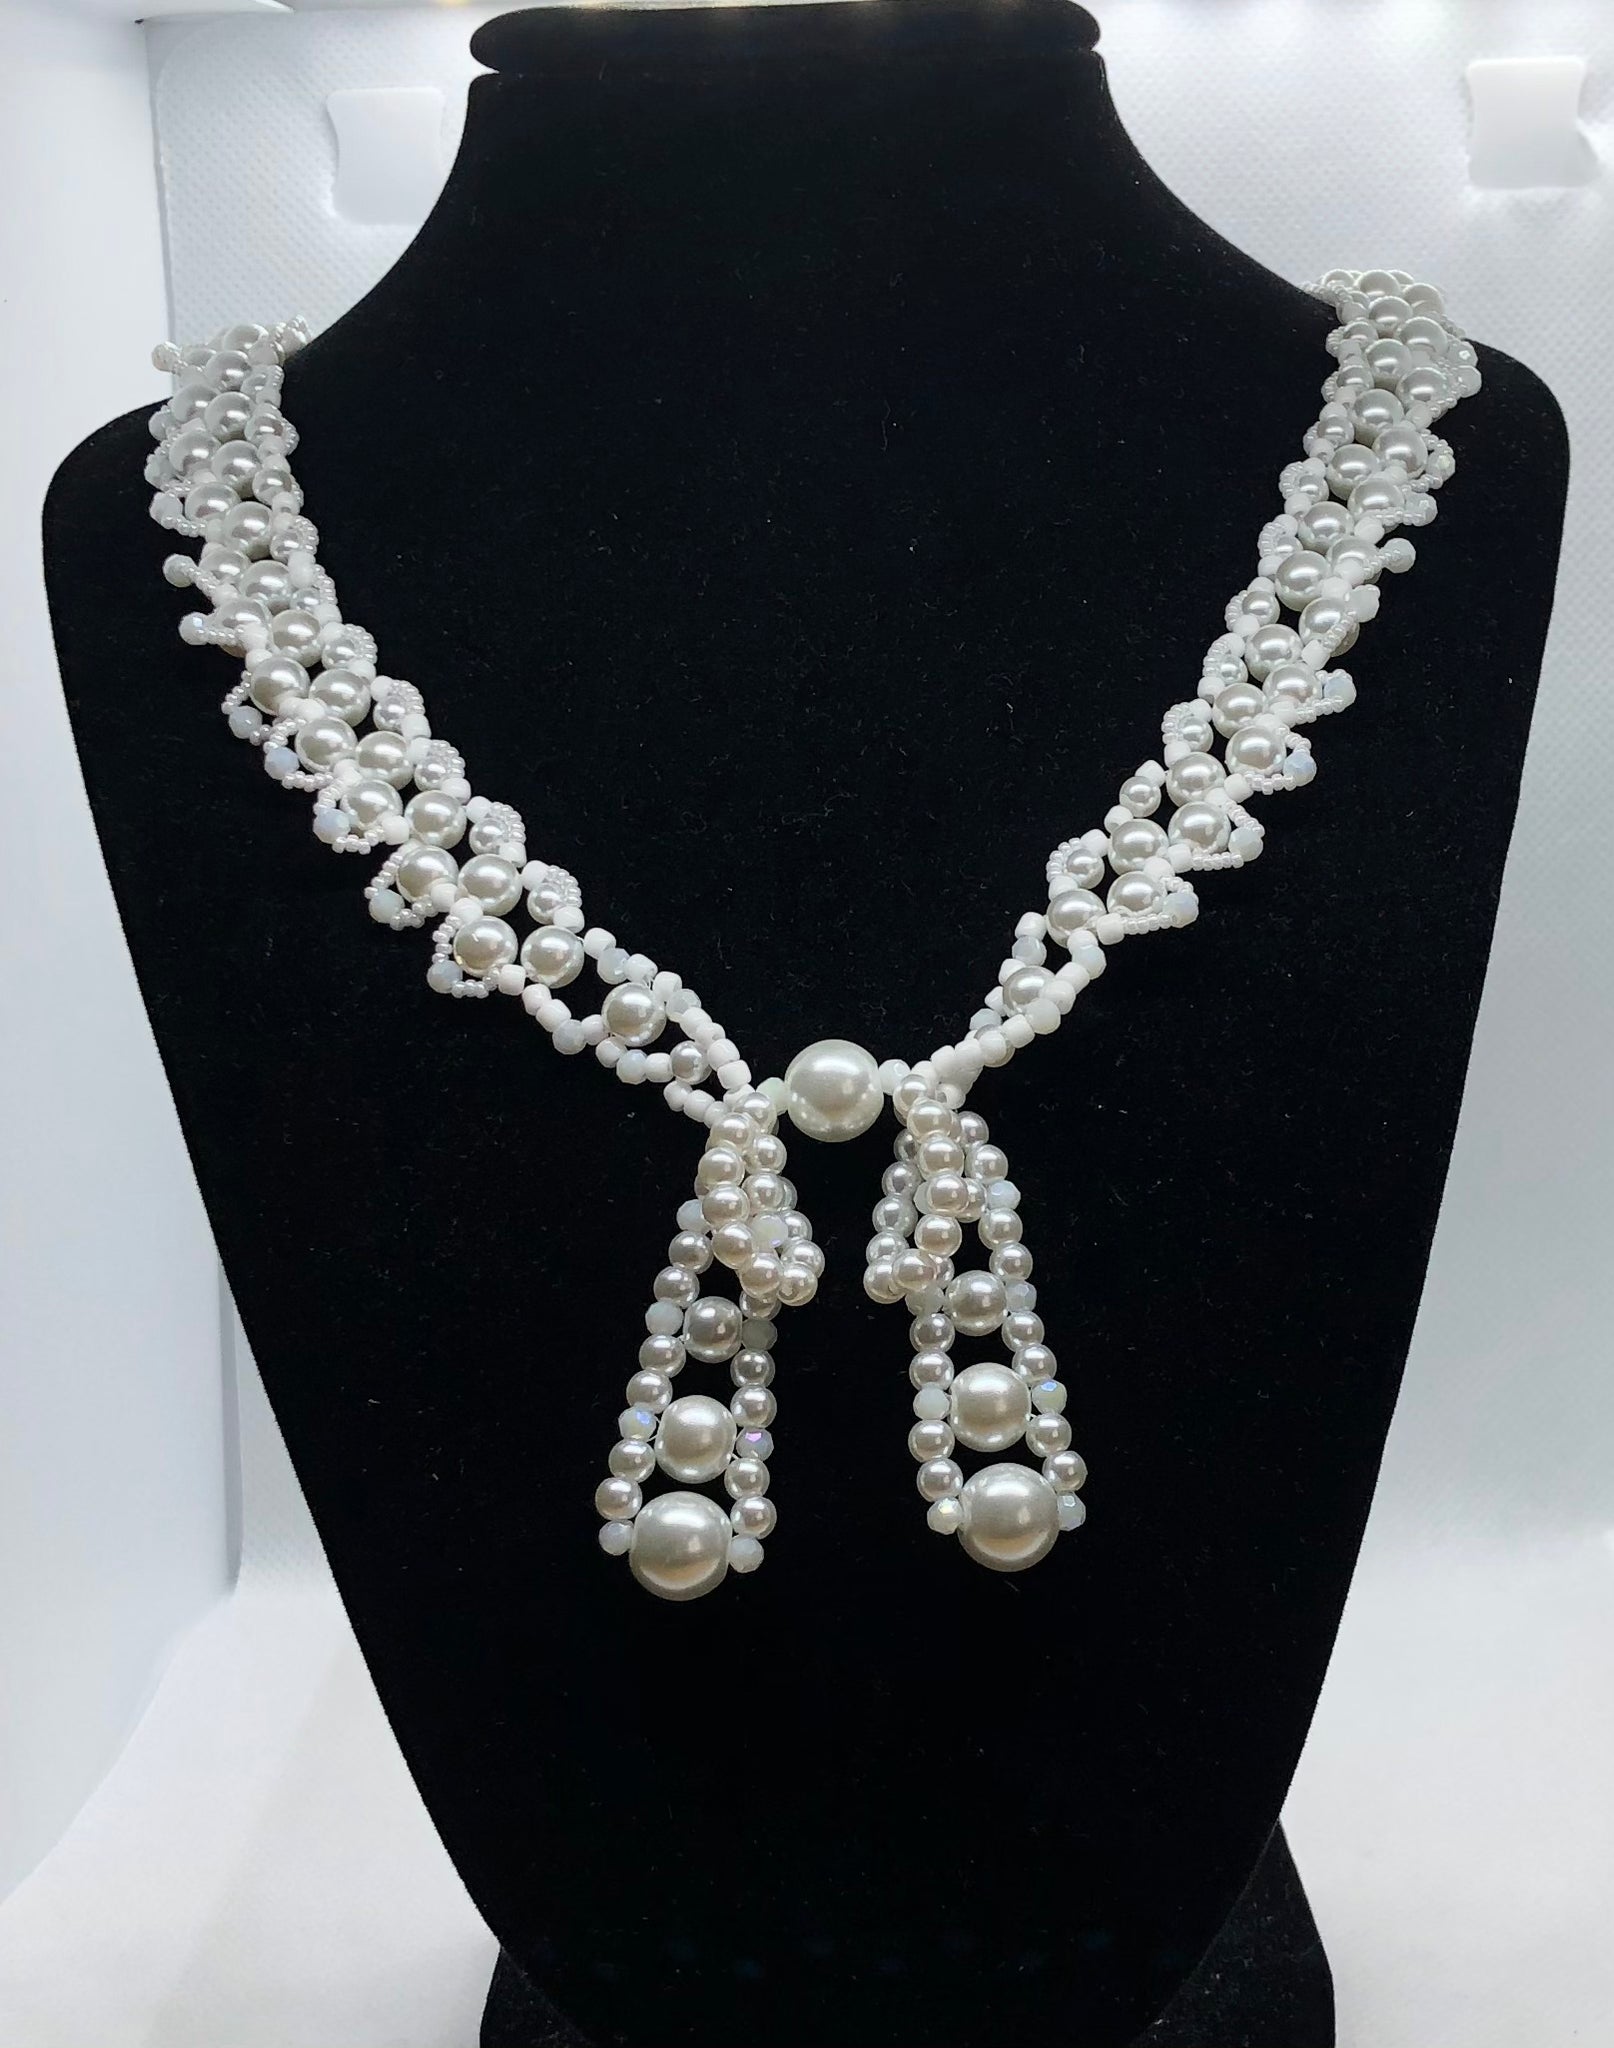 Pearls & Bows Necklace